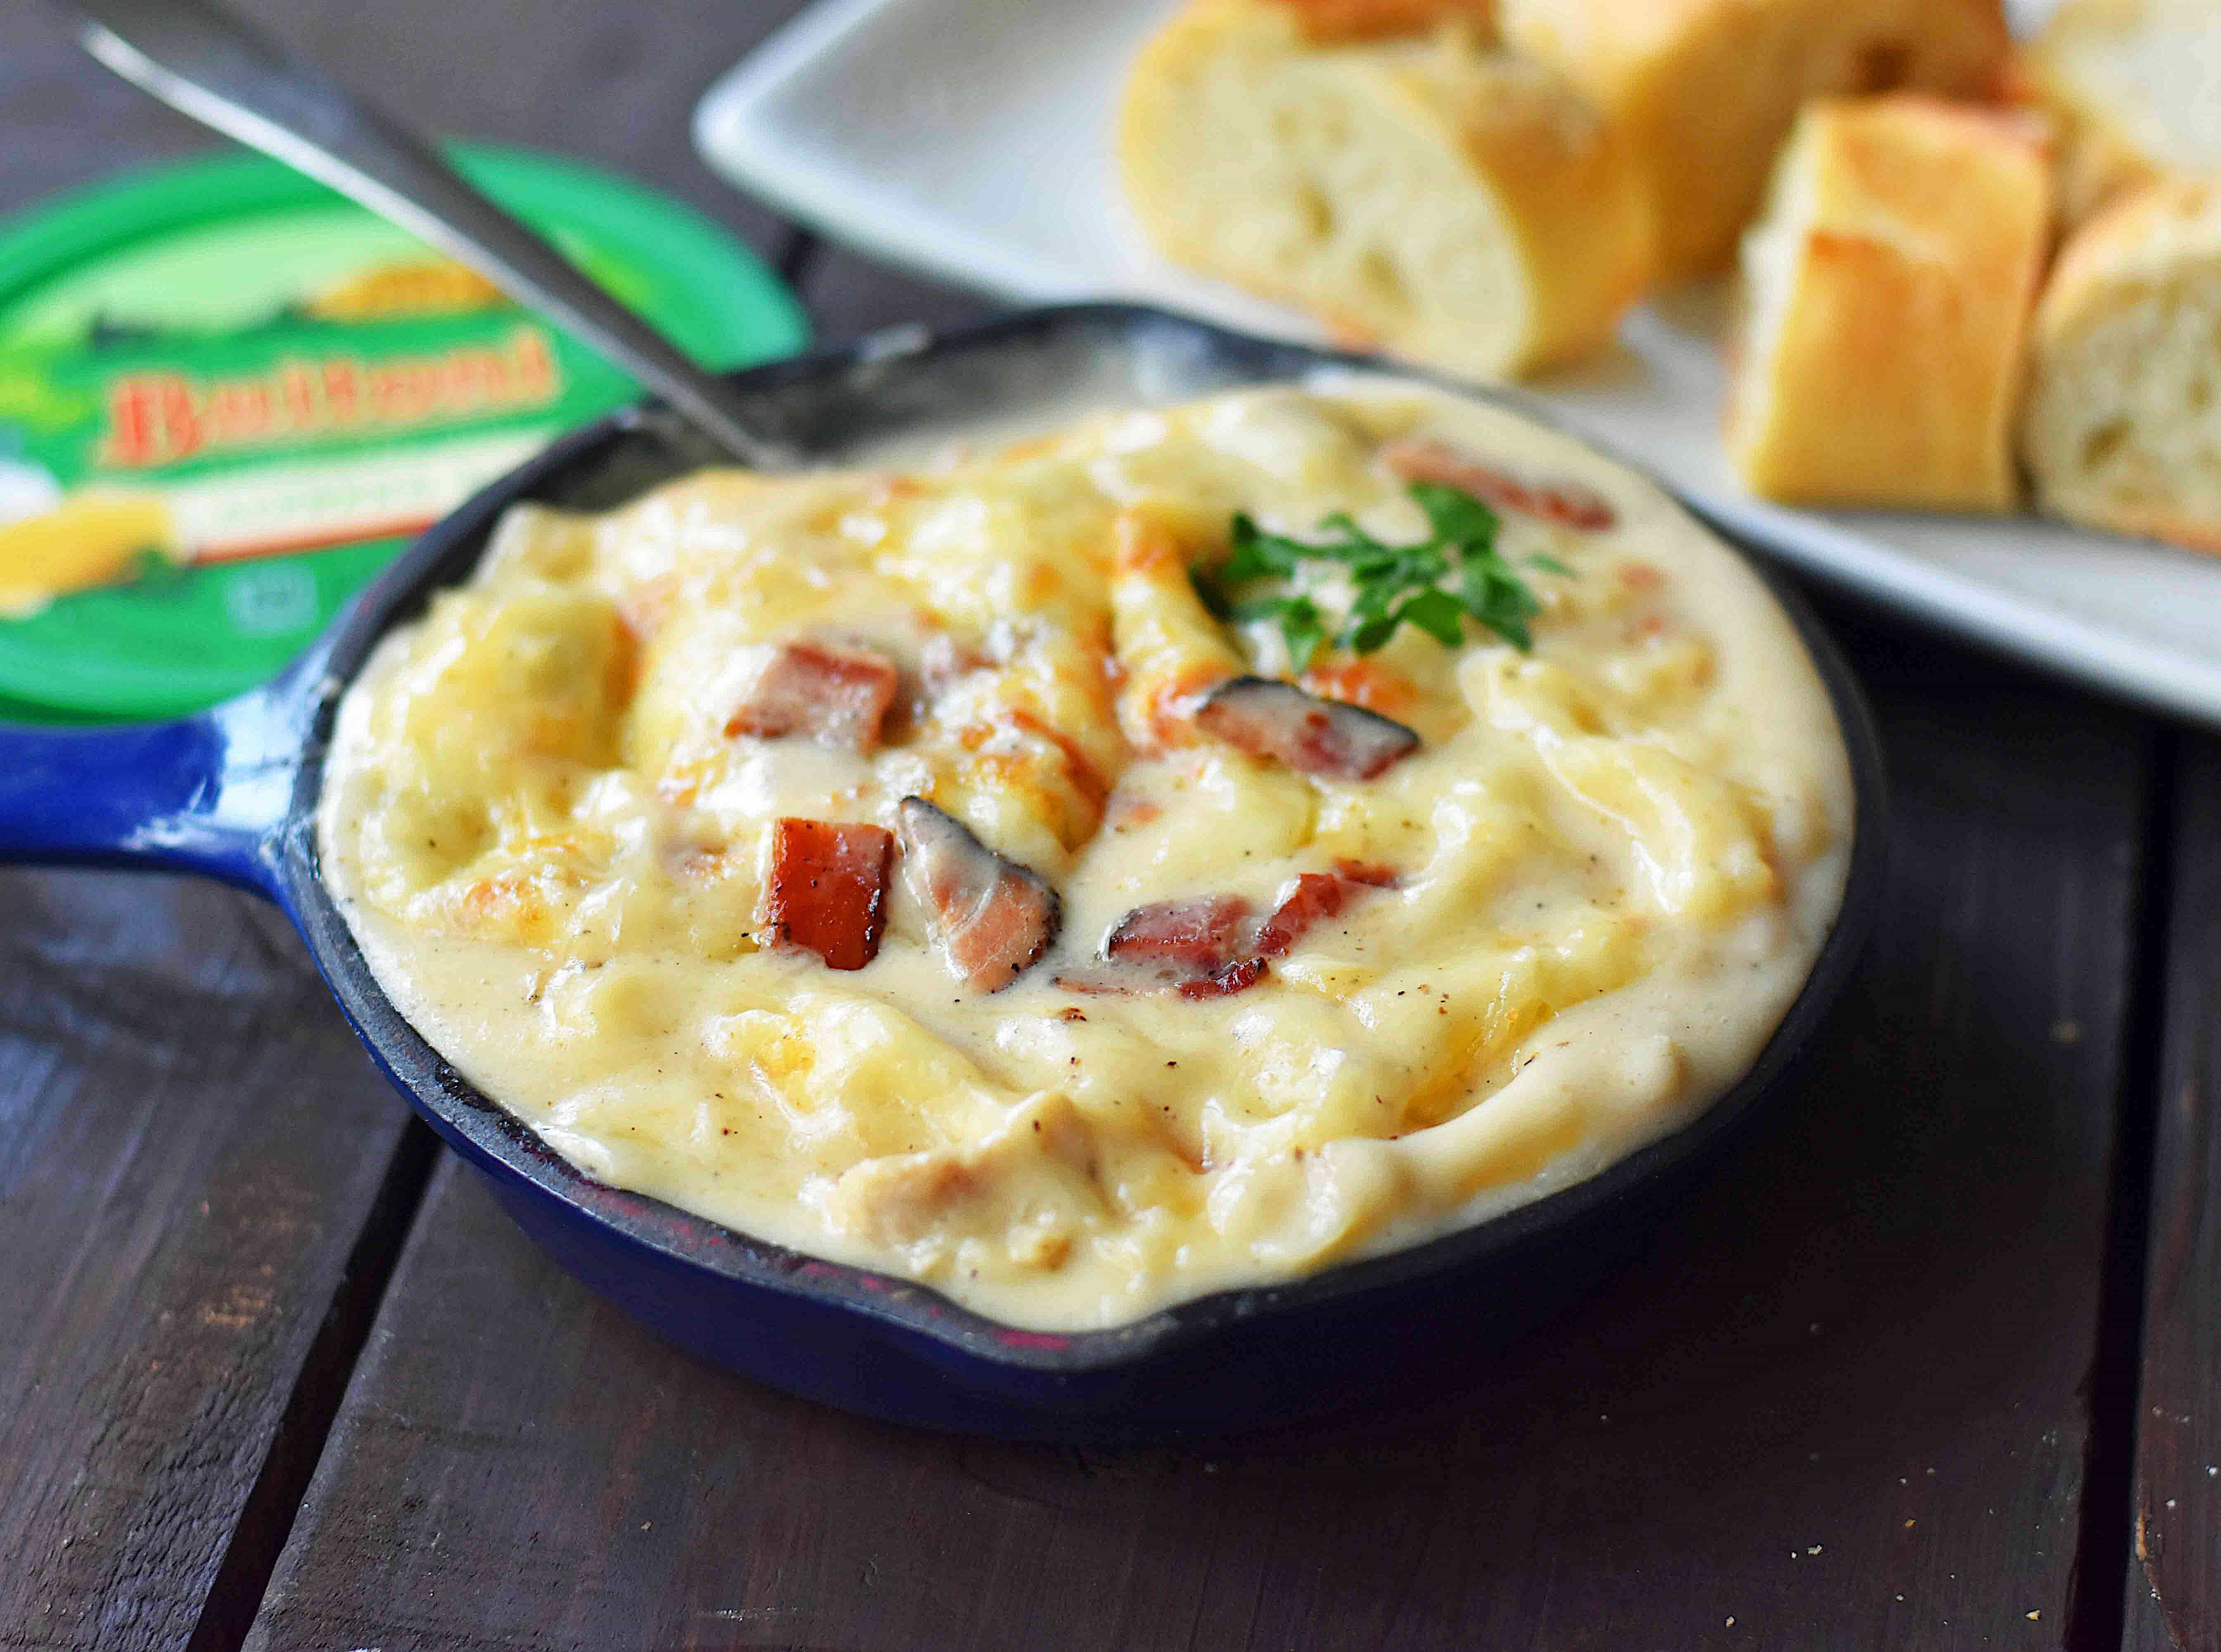 Chicken Bacon Alfredo Dip with Sautéed Chicken, Buitoni Alfredo Sauce, Crispy Bacon and baked with Mozzarella and Buitoni Parmesan Cheese. Served with sliced French Bread. A savory and cheese-filled baked appetizer that will please the masses!